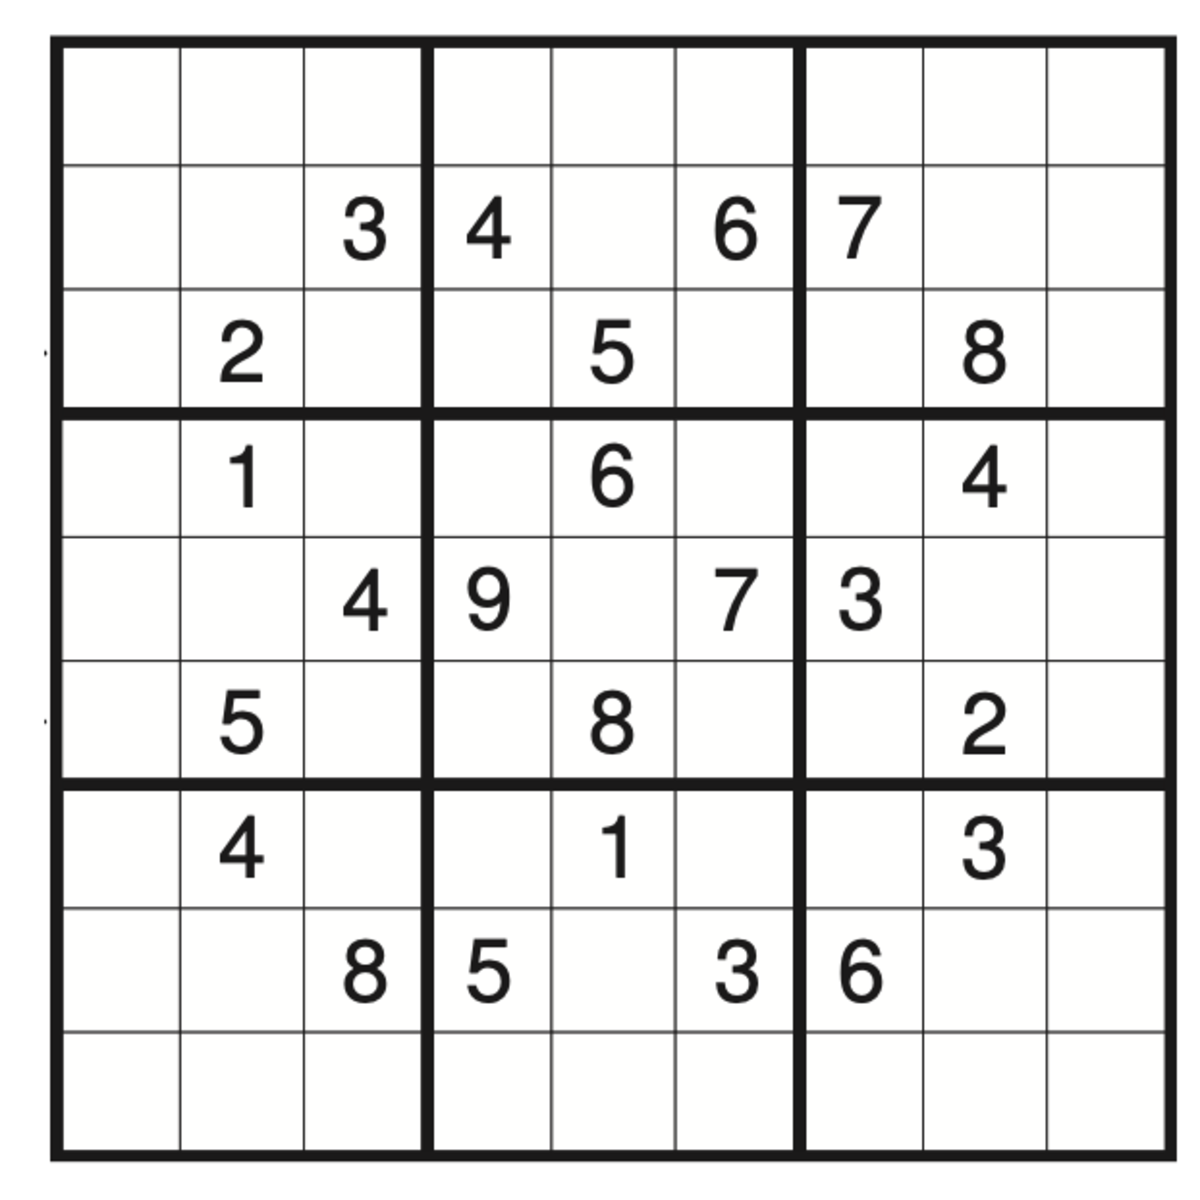 9 Million Sudoku Puzzles and Solutions